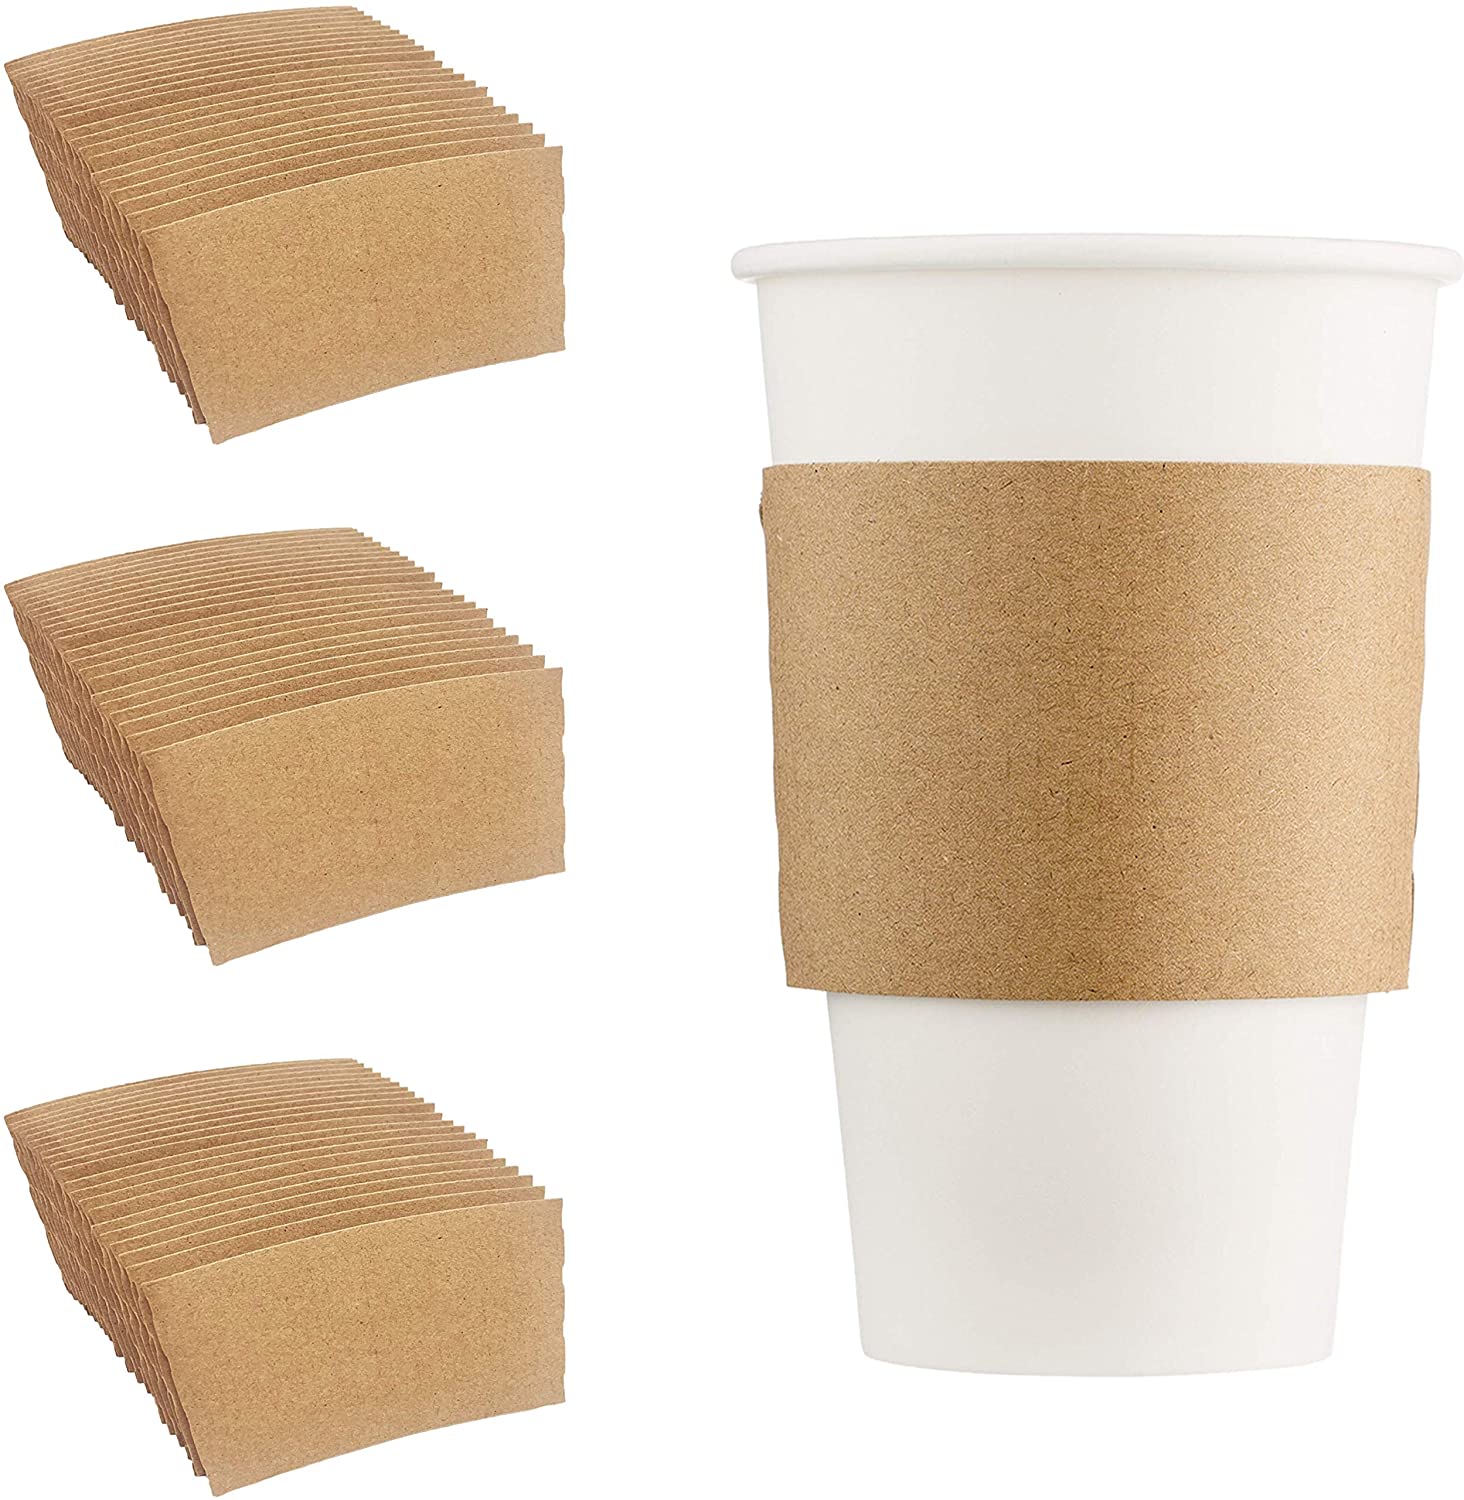  HONGTT Coffee Sleeves Reusable Coffee Cup Holder with